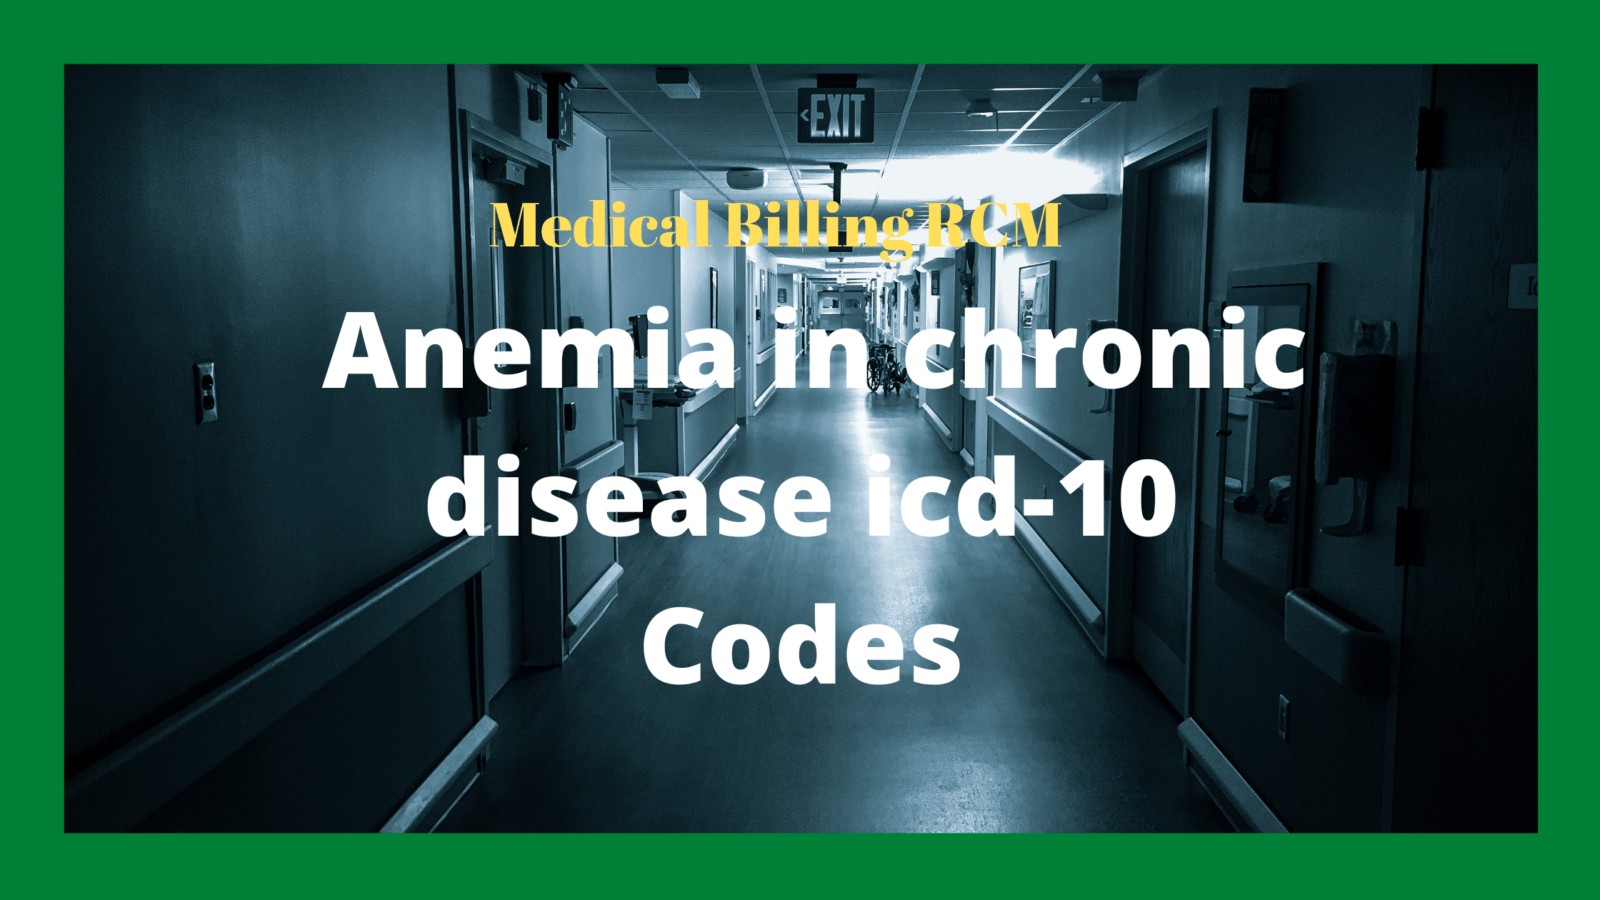 Anemia in chronic disease icd-10 codes list